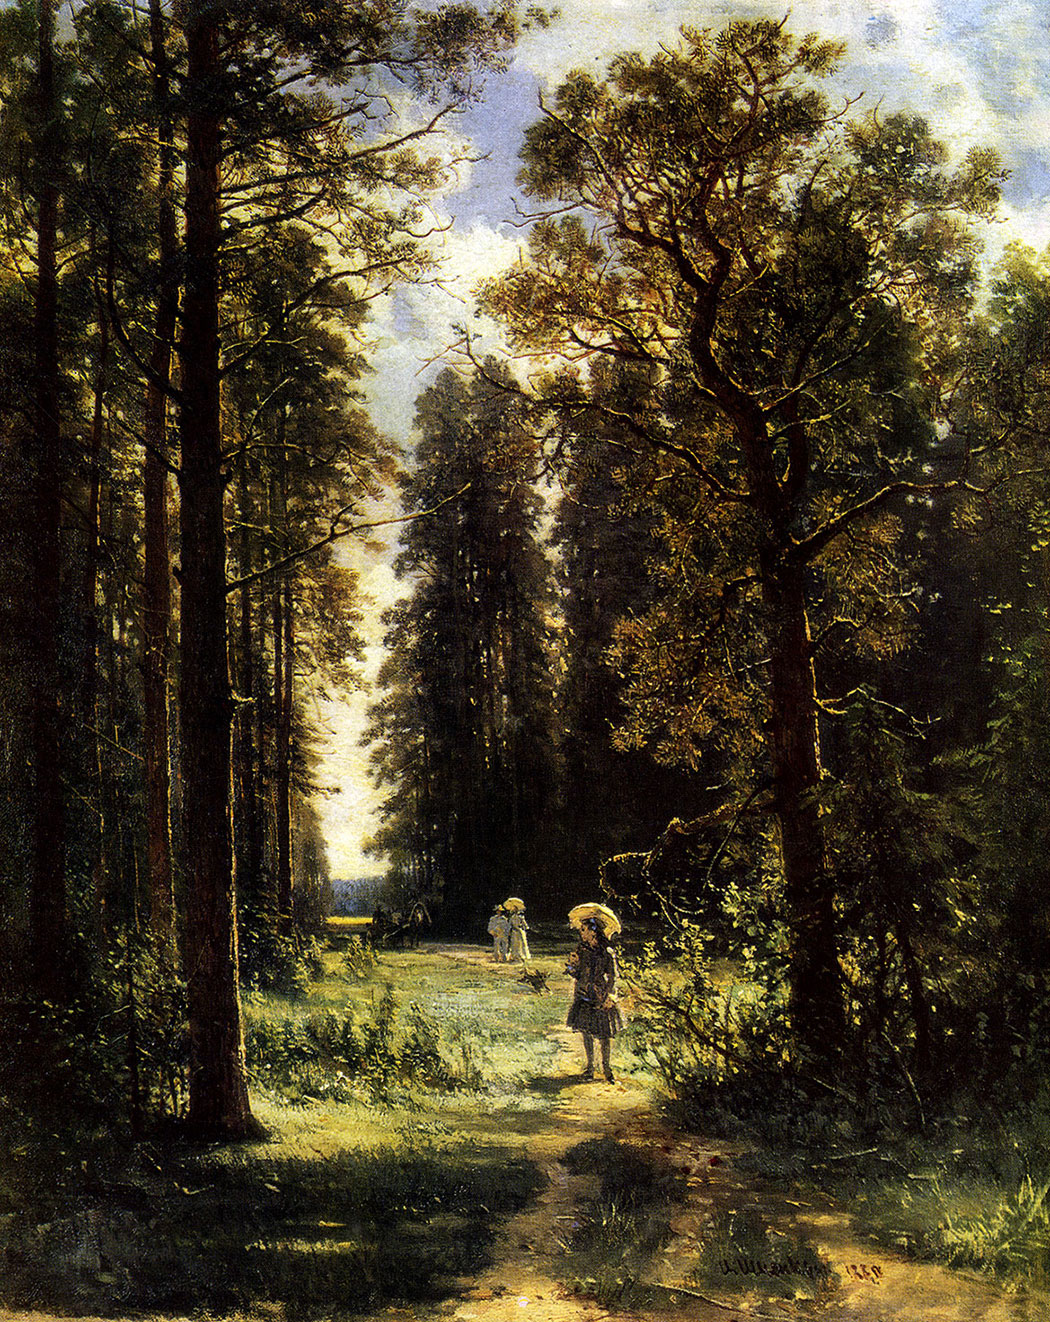 84. Forest walk. 1880. Oil on canvas. 59X48 cm. The Russian Museum, Leningrad